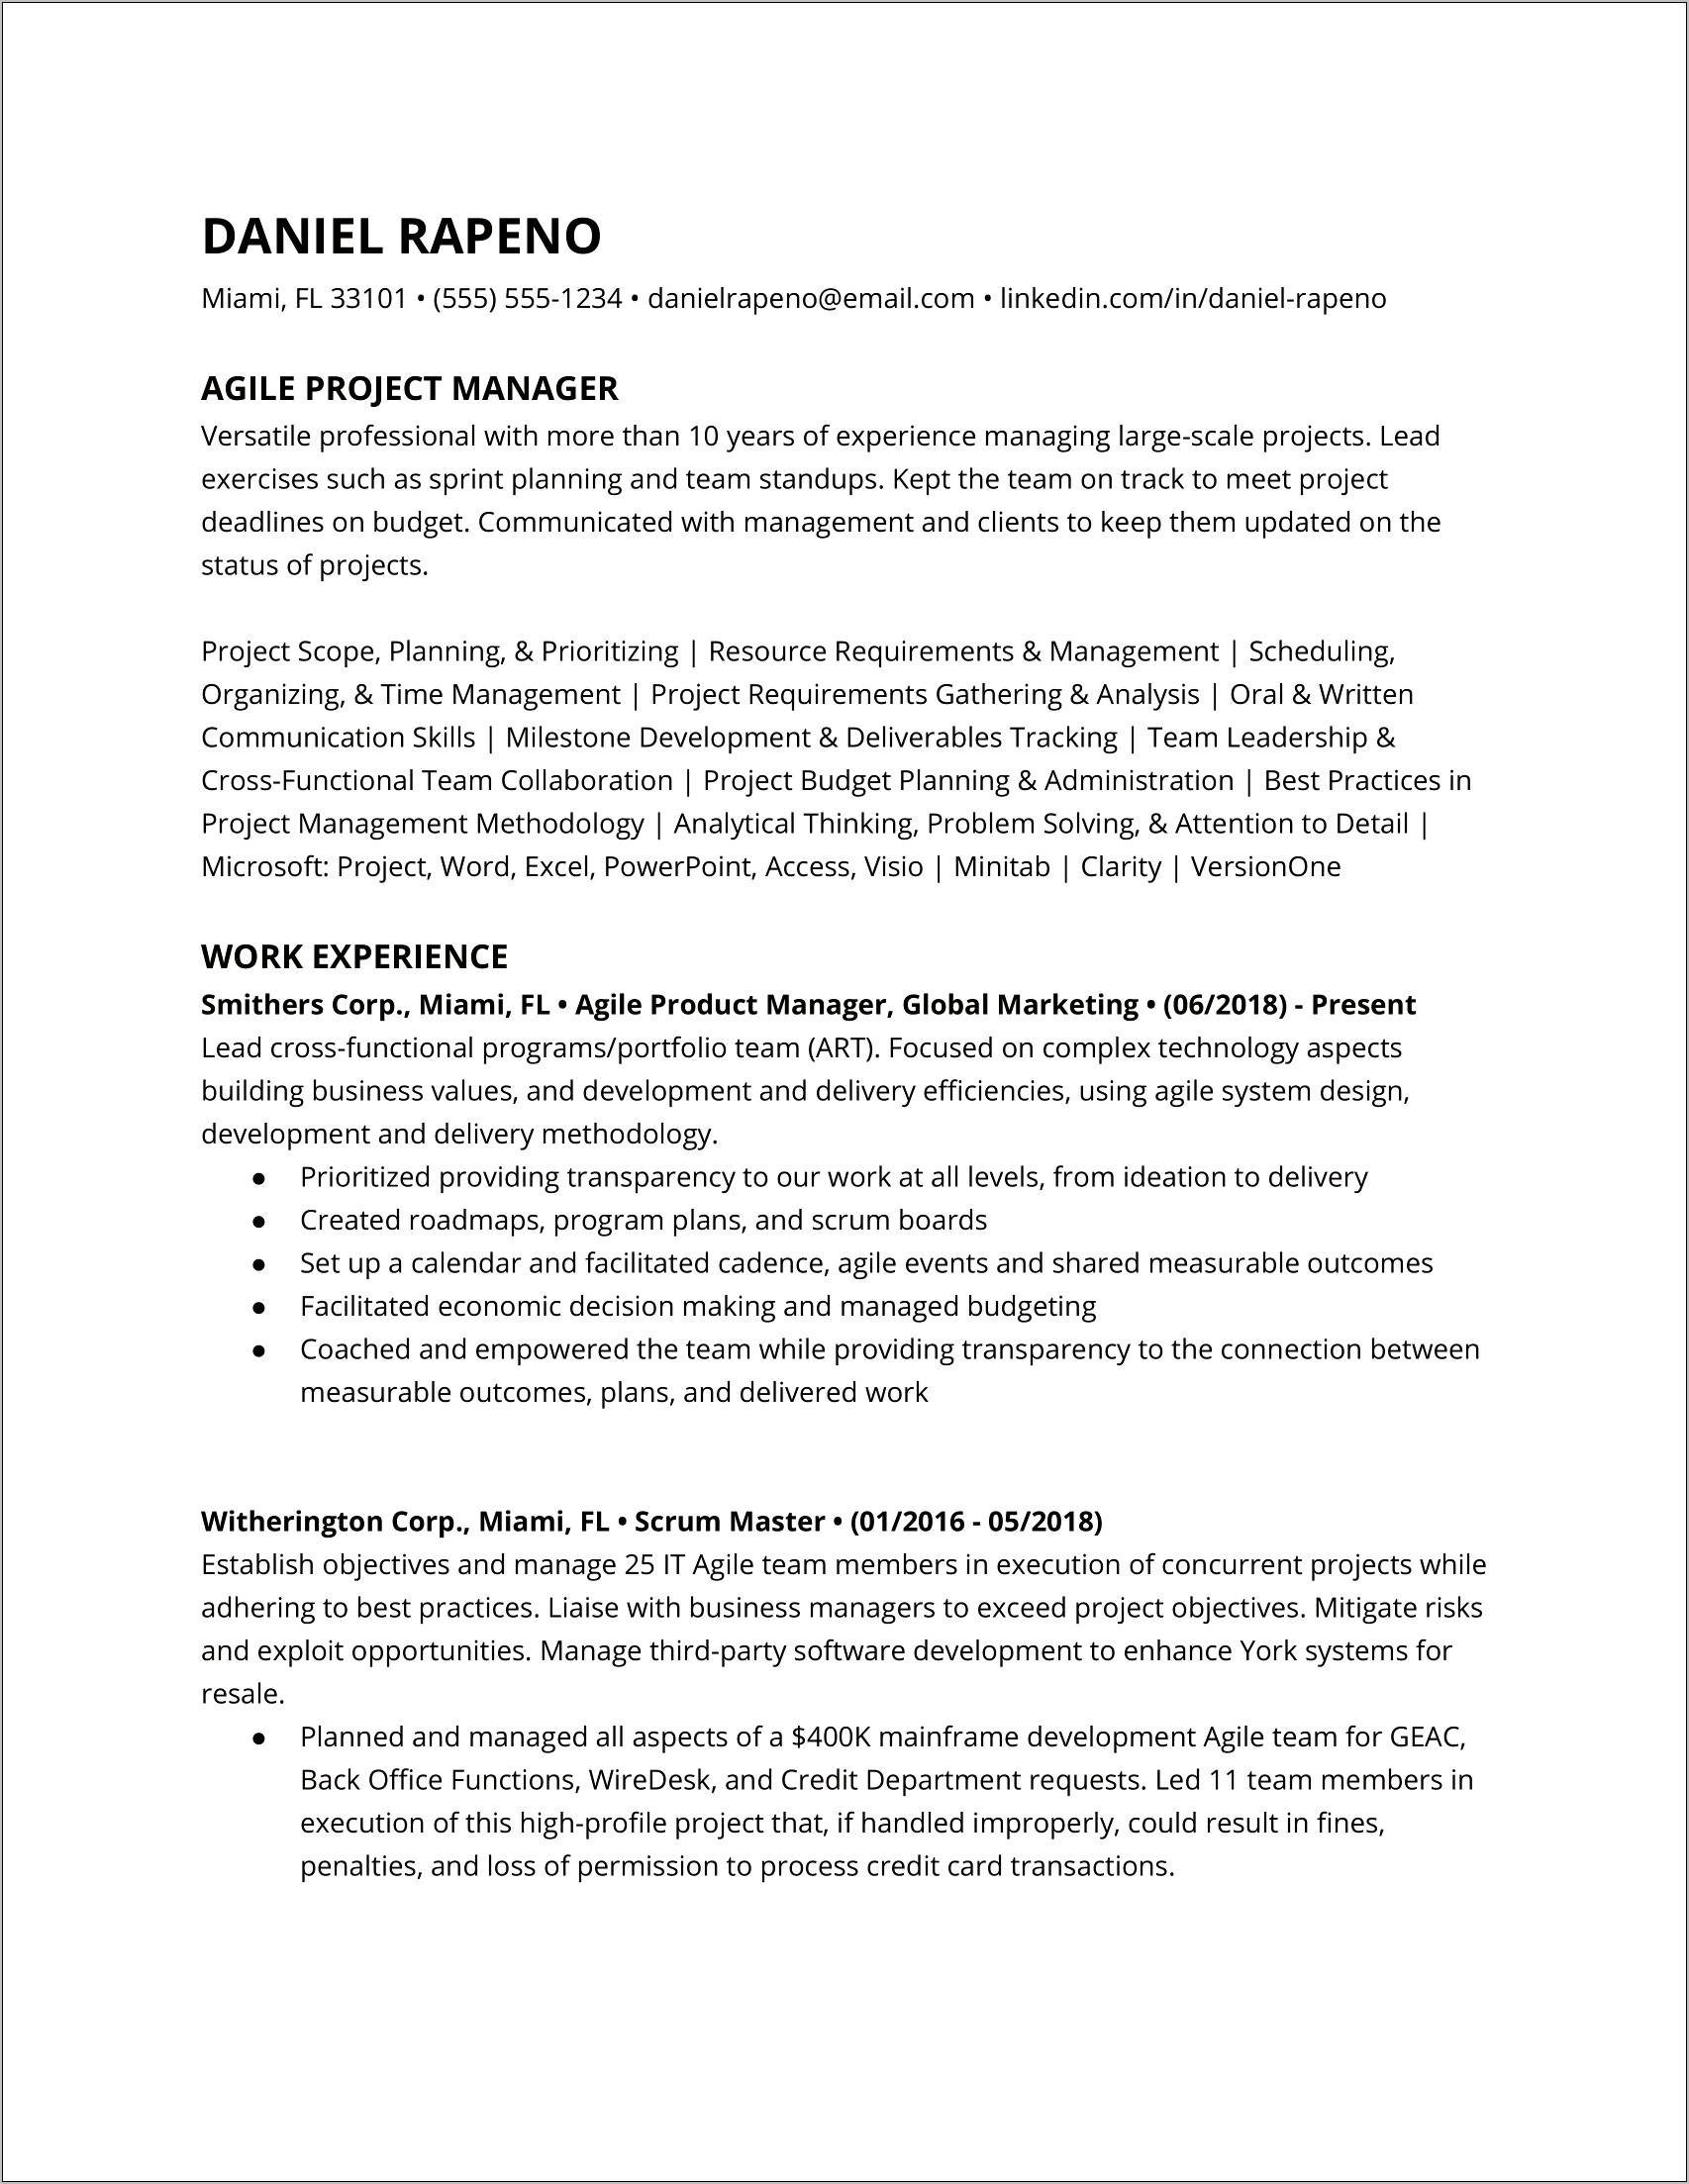 Construction Management Experience In Resume